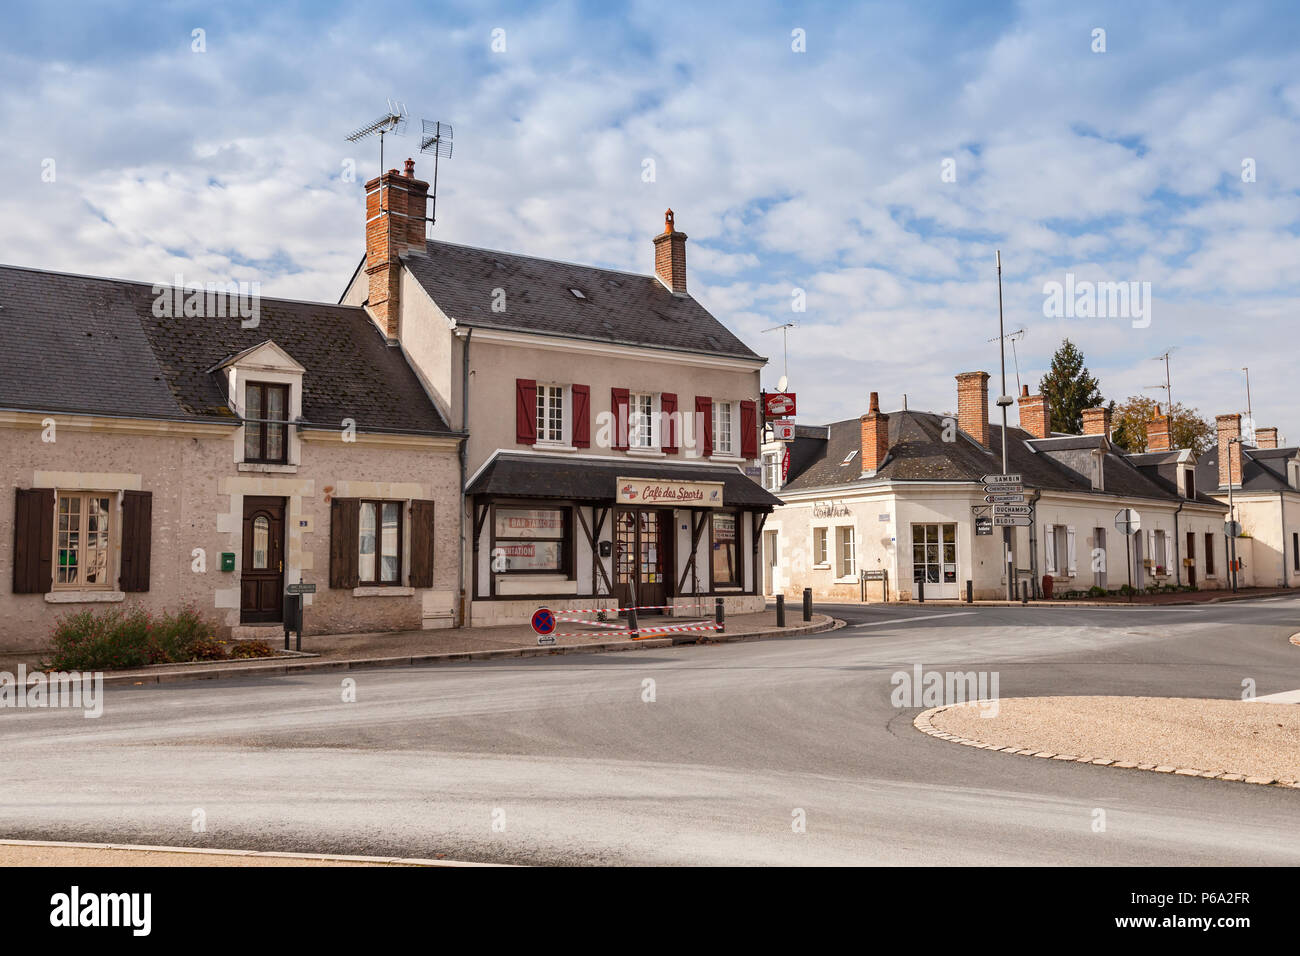 Fougeres-sur-Bievre, France - 6 November, 2016: Street view with old houses facades in French medieval town, Loire river Valley Stock Photo